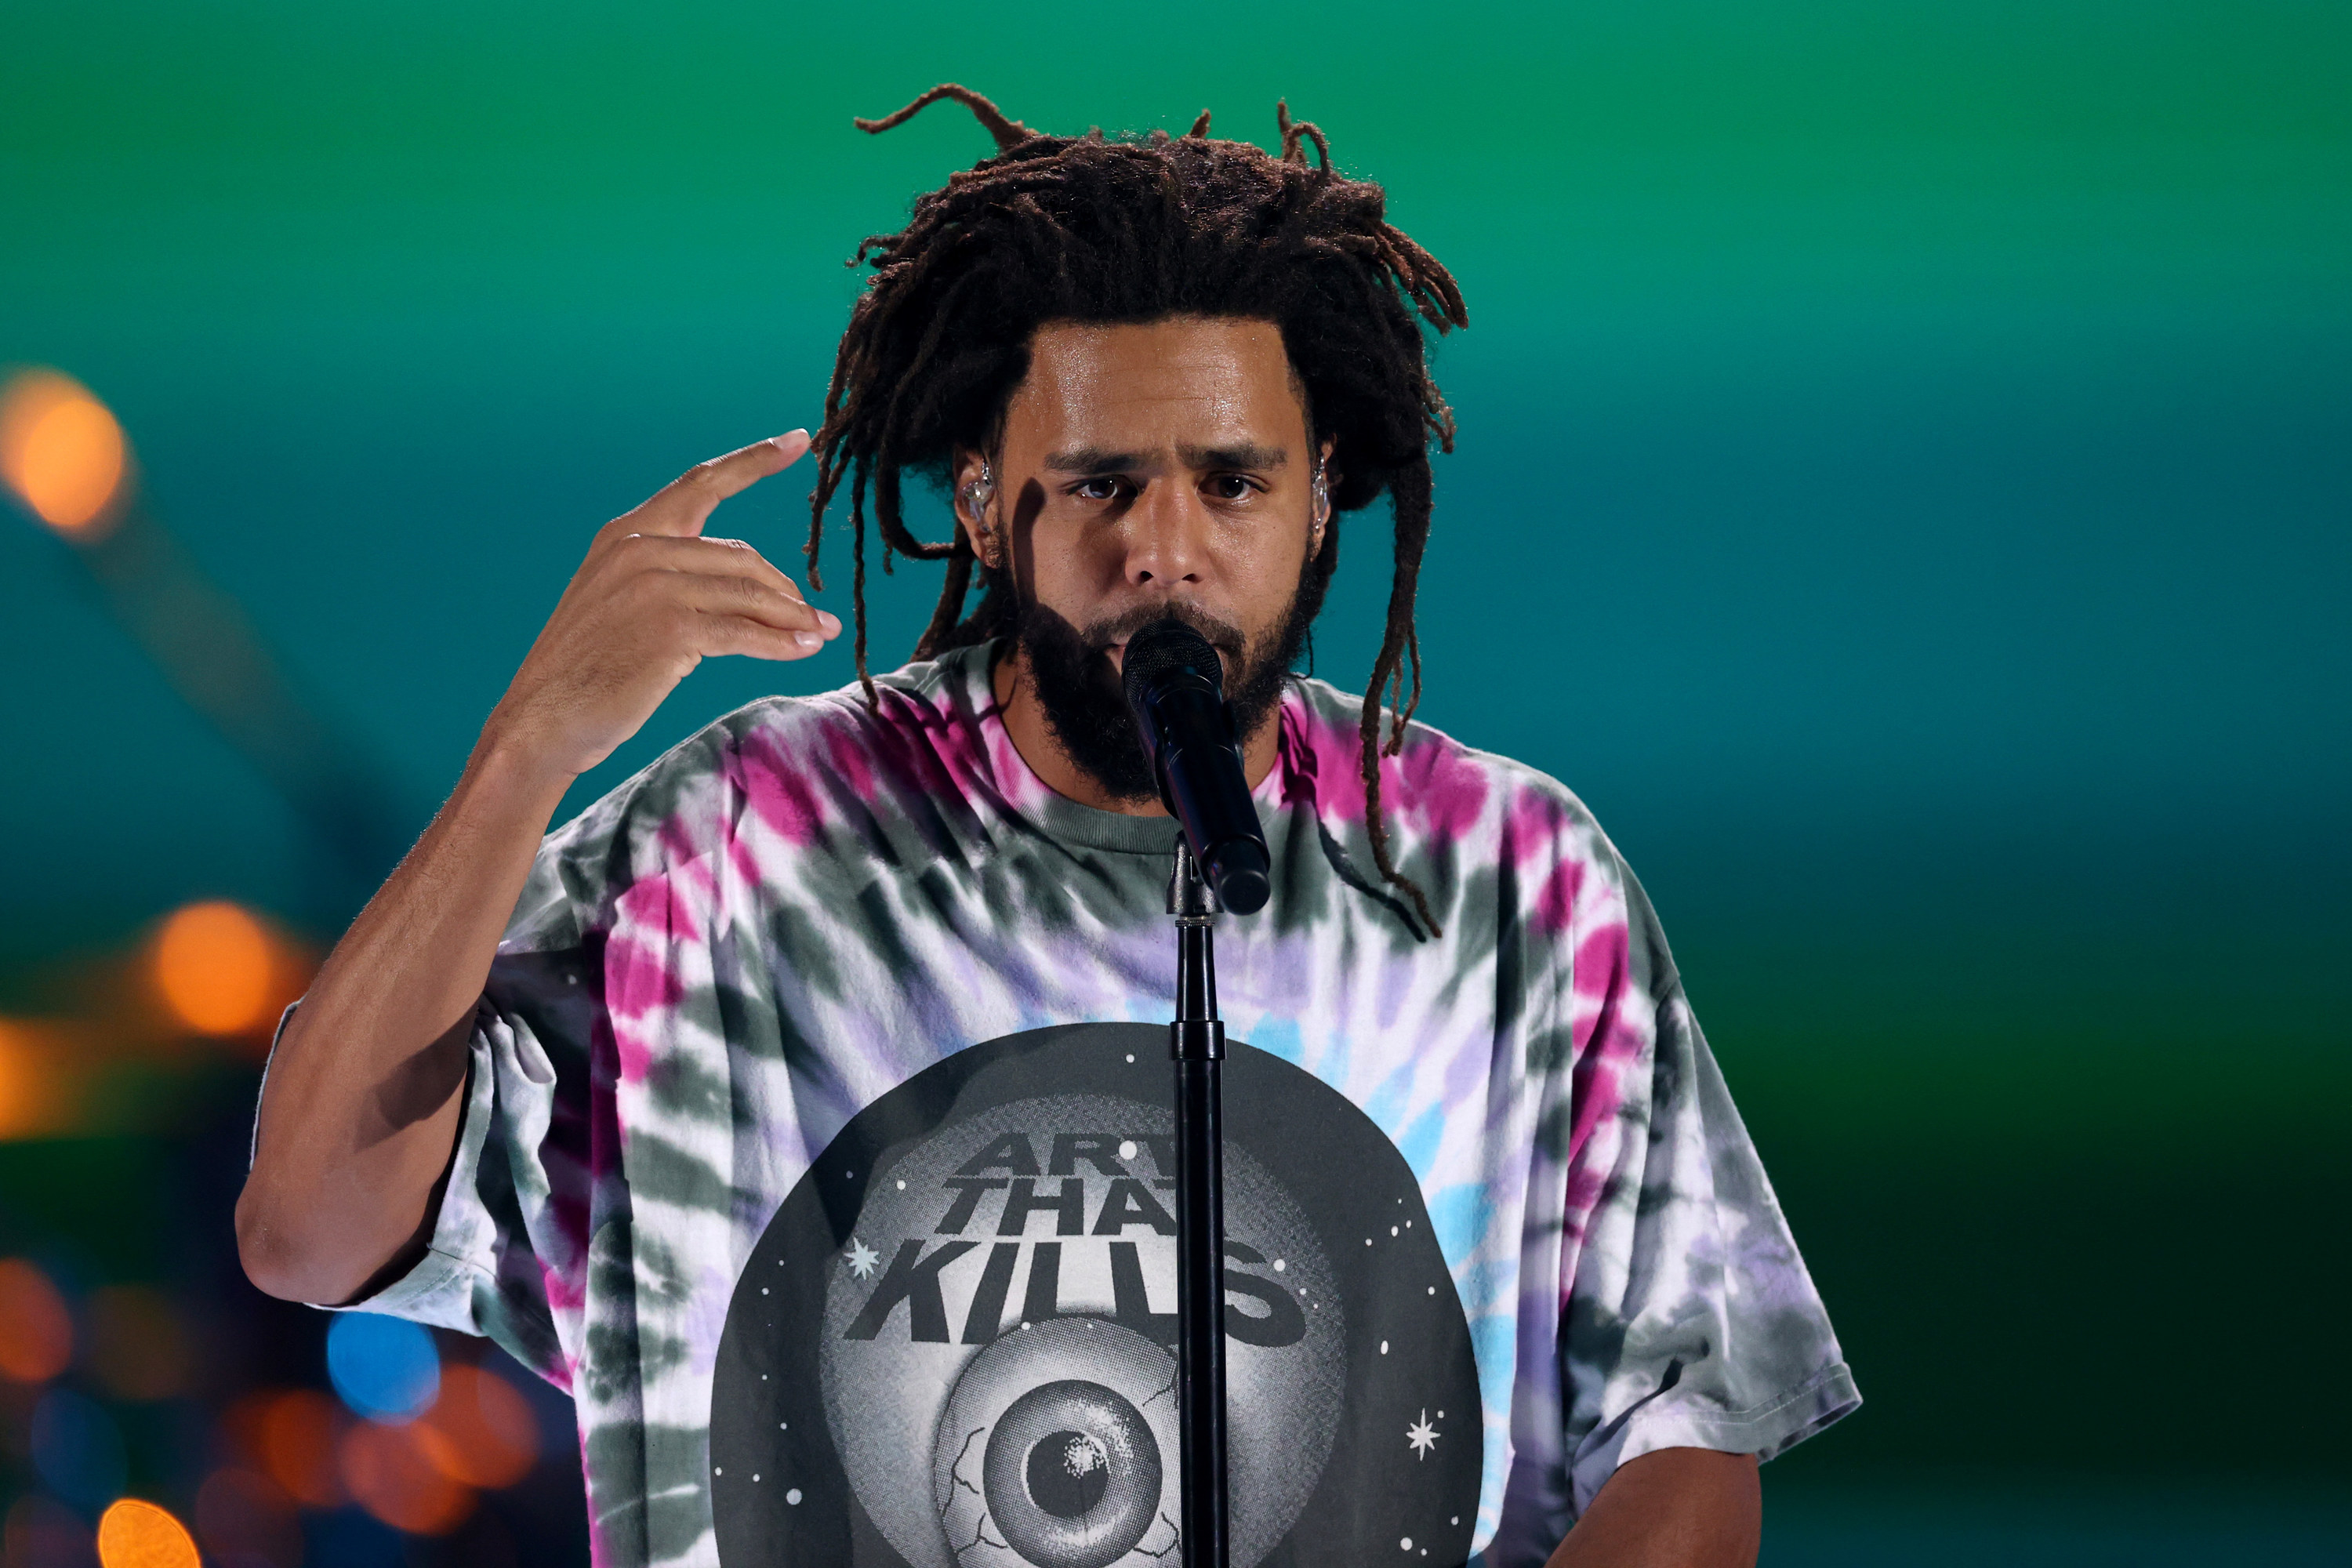 J. Cole performing live.